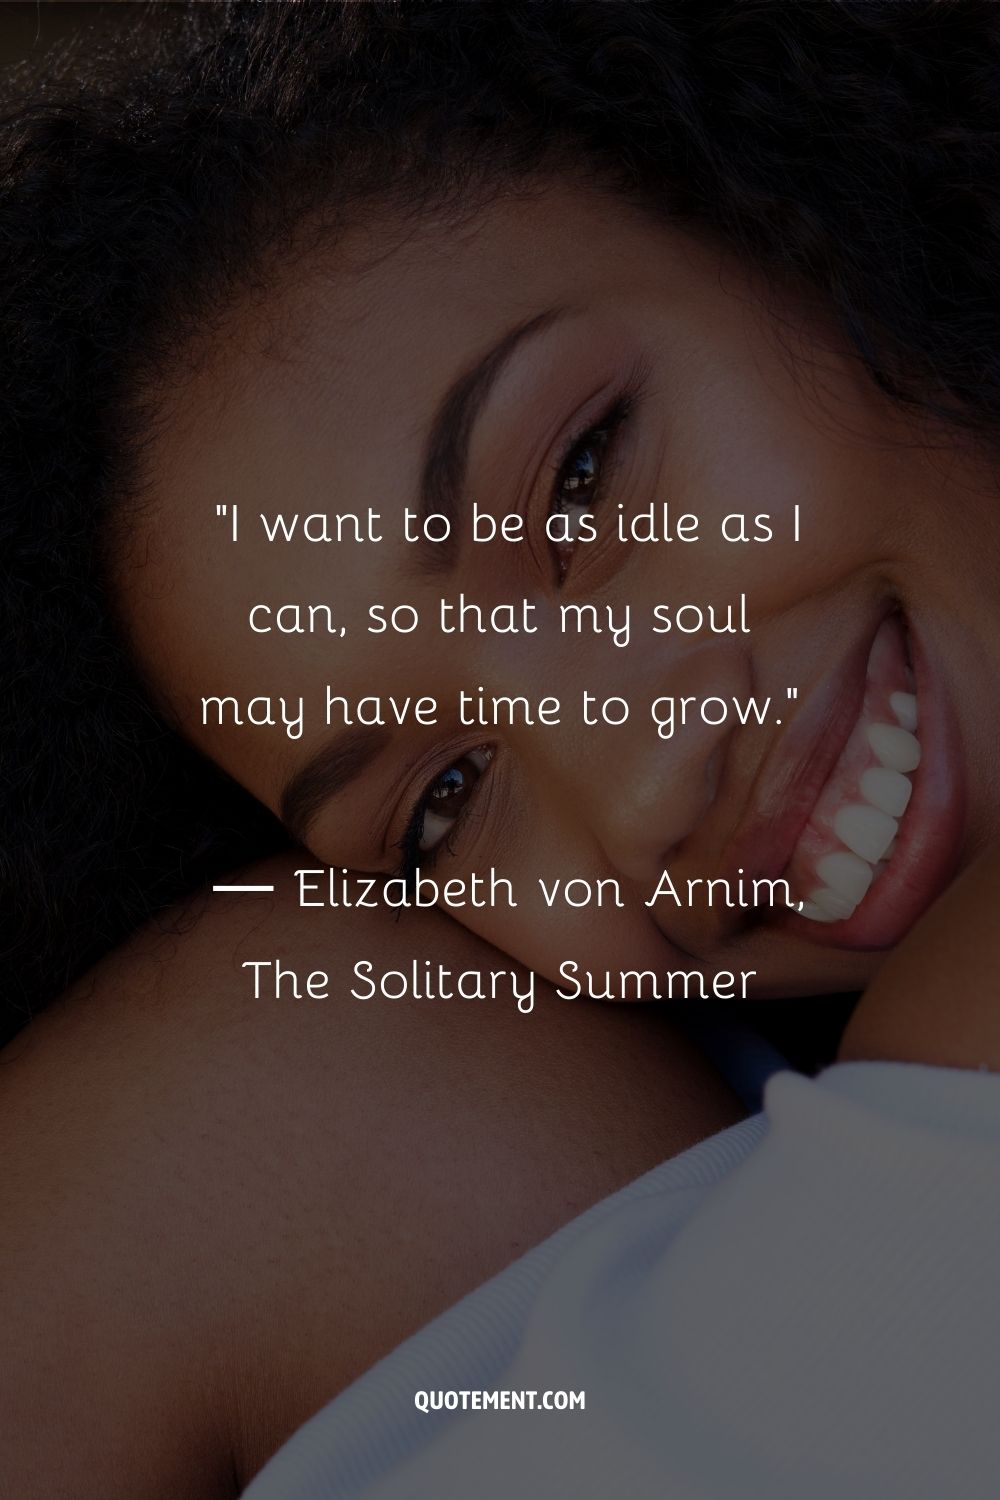 I want to be as idle as I can, so that my soul may have time to grow.